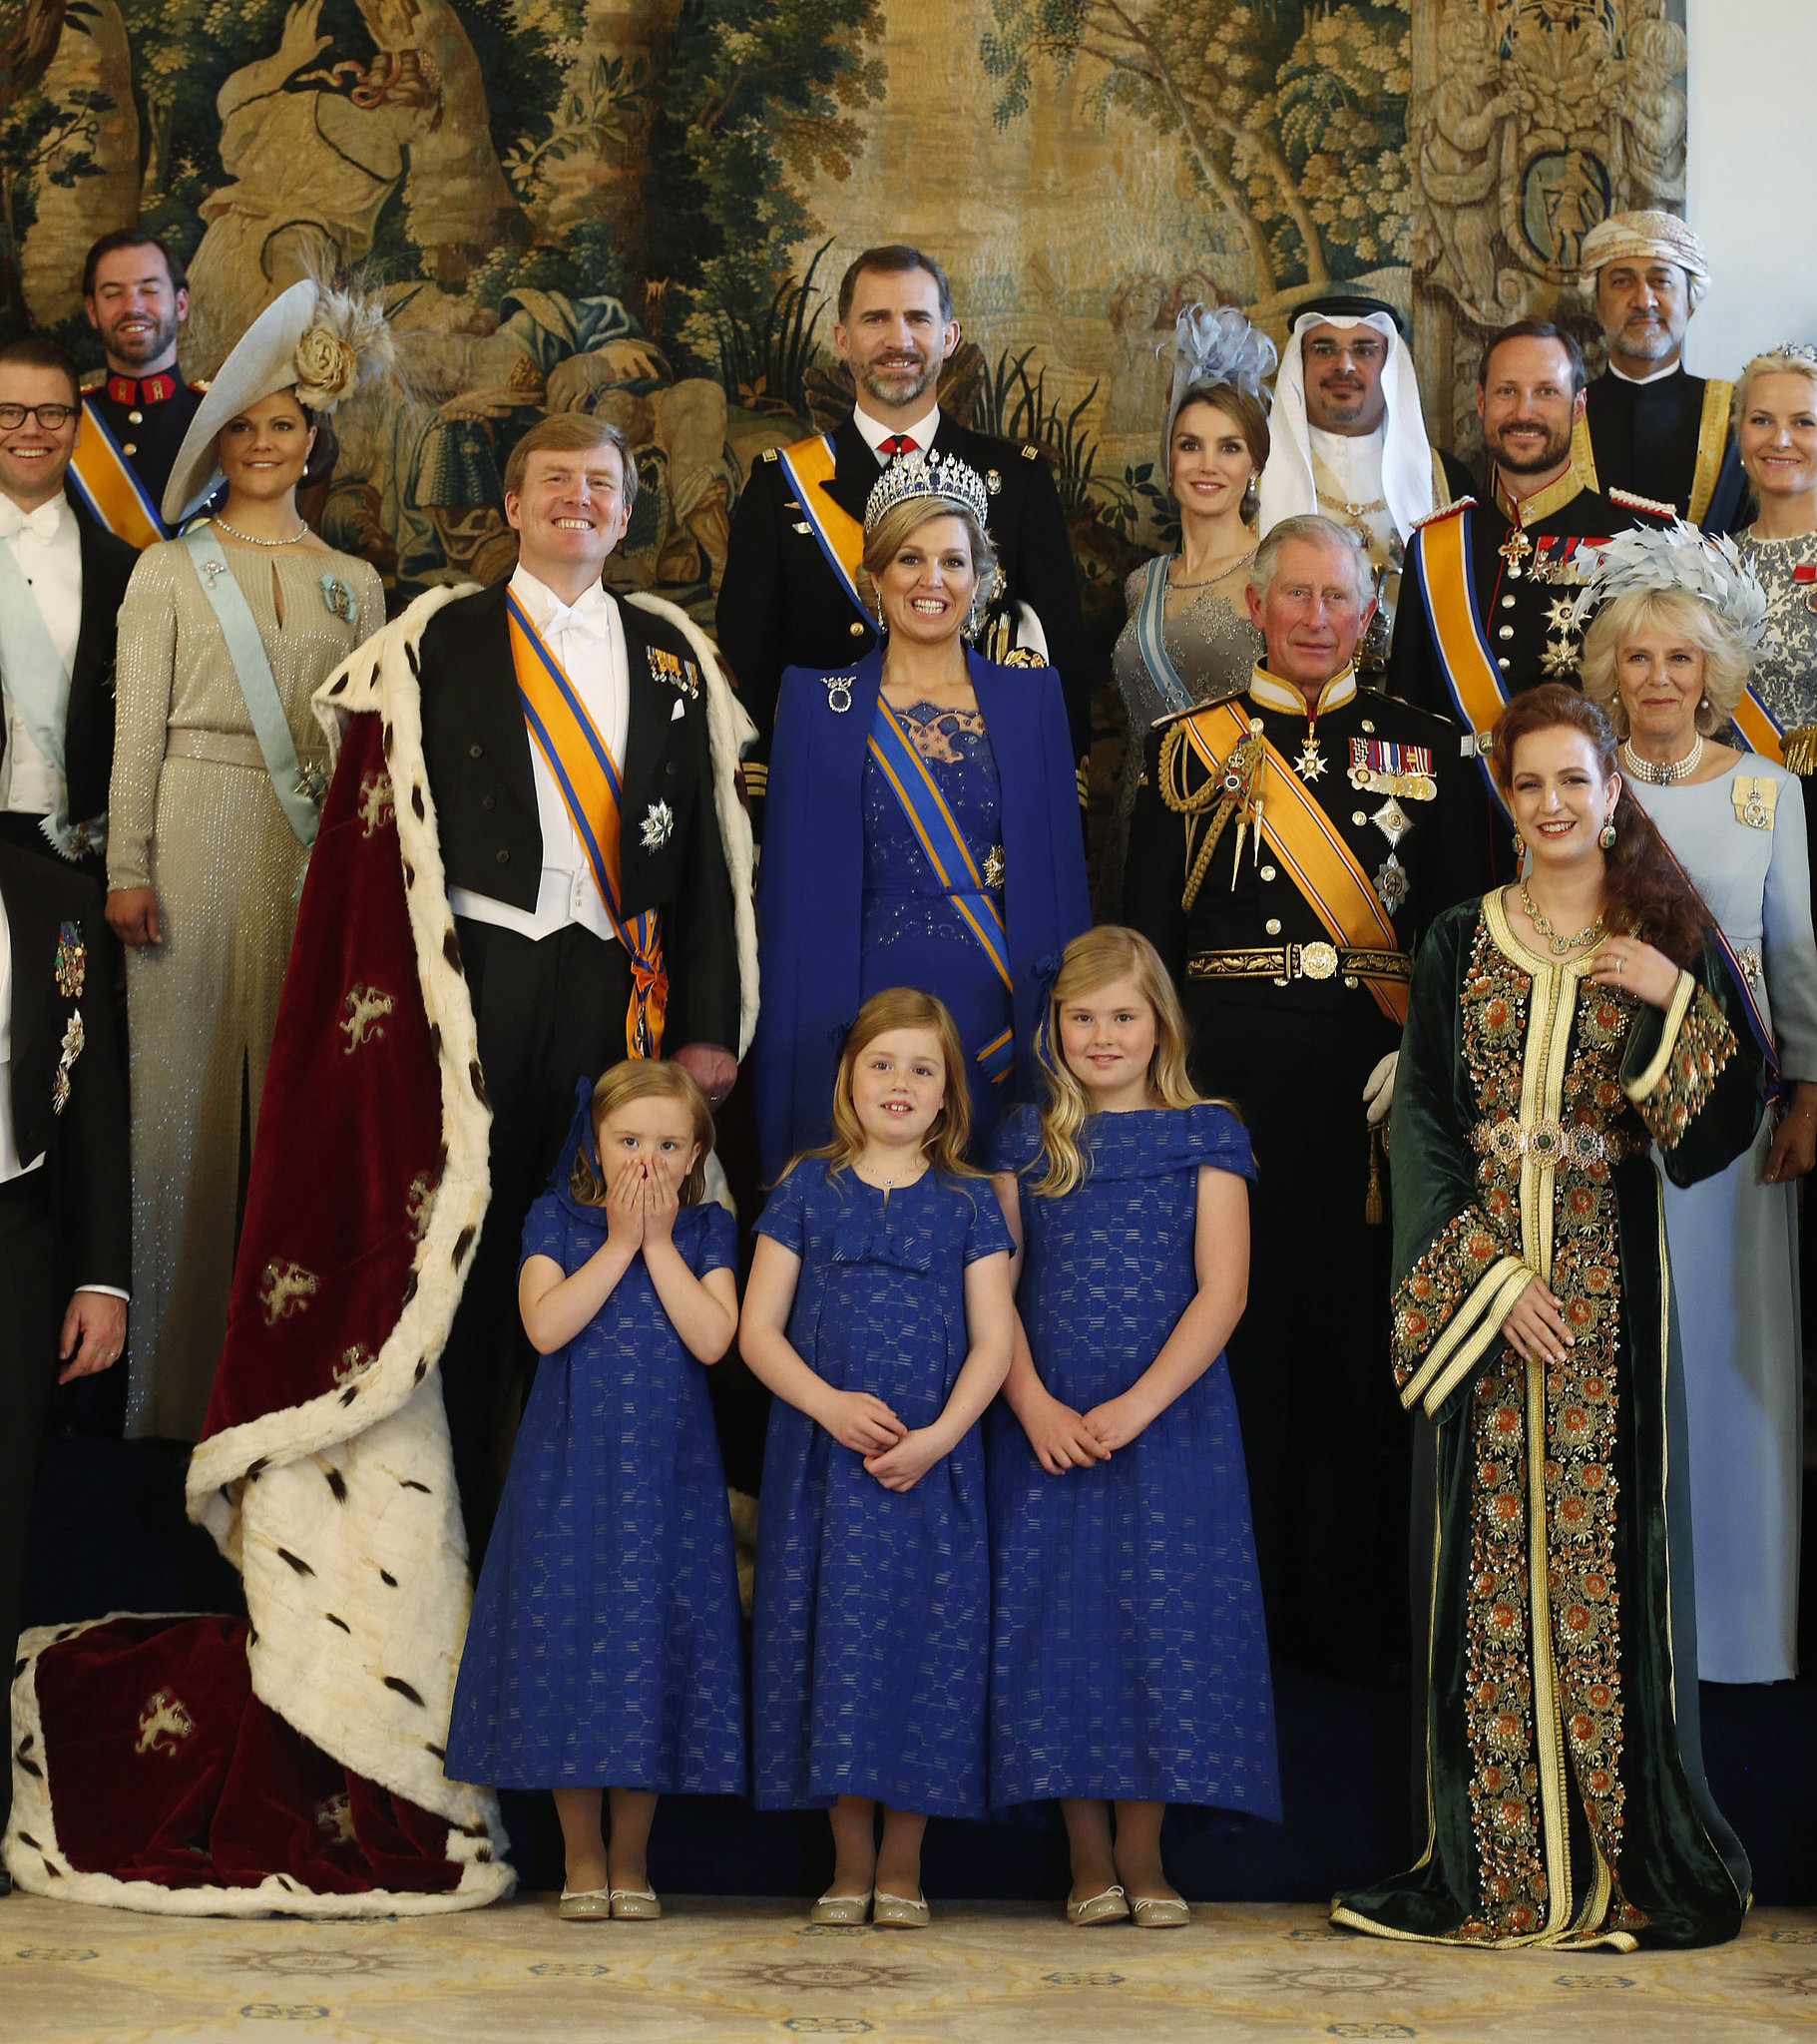 The Dutch royal family posed with other royals following the Royals